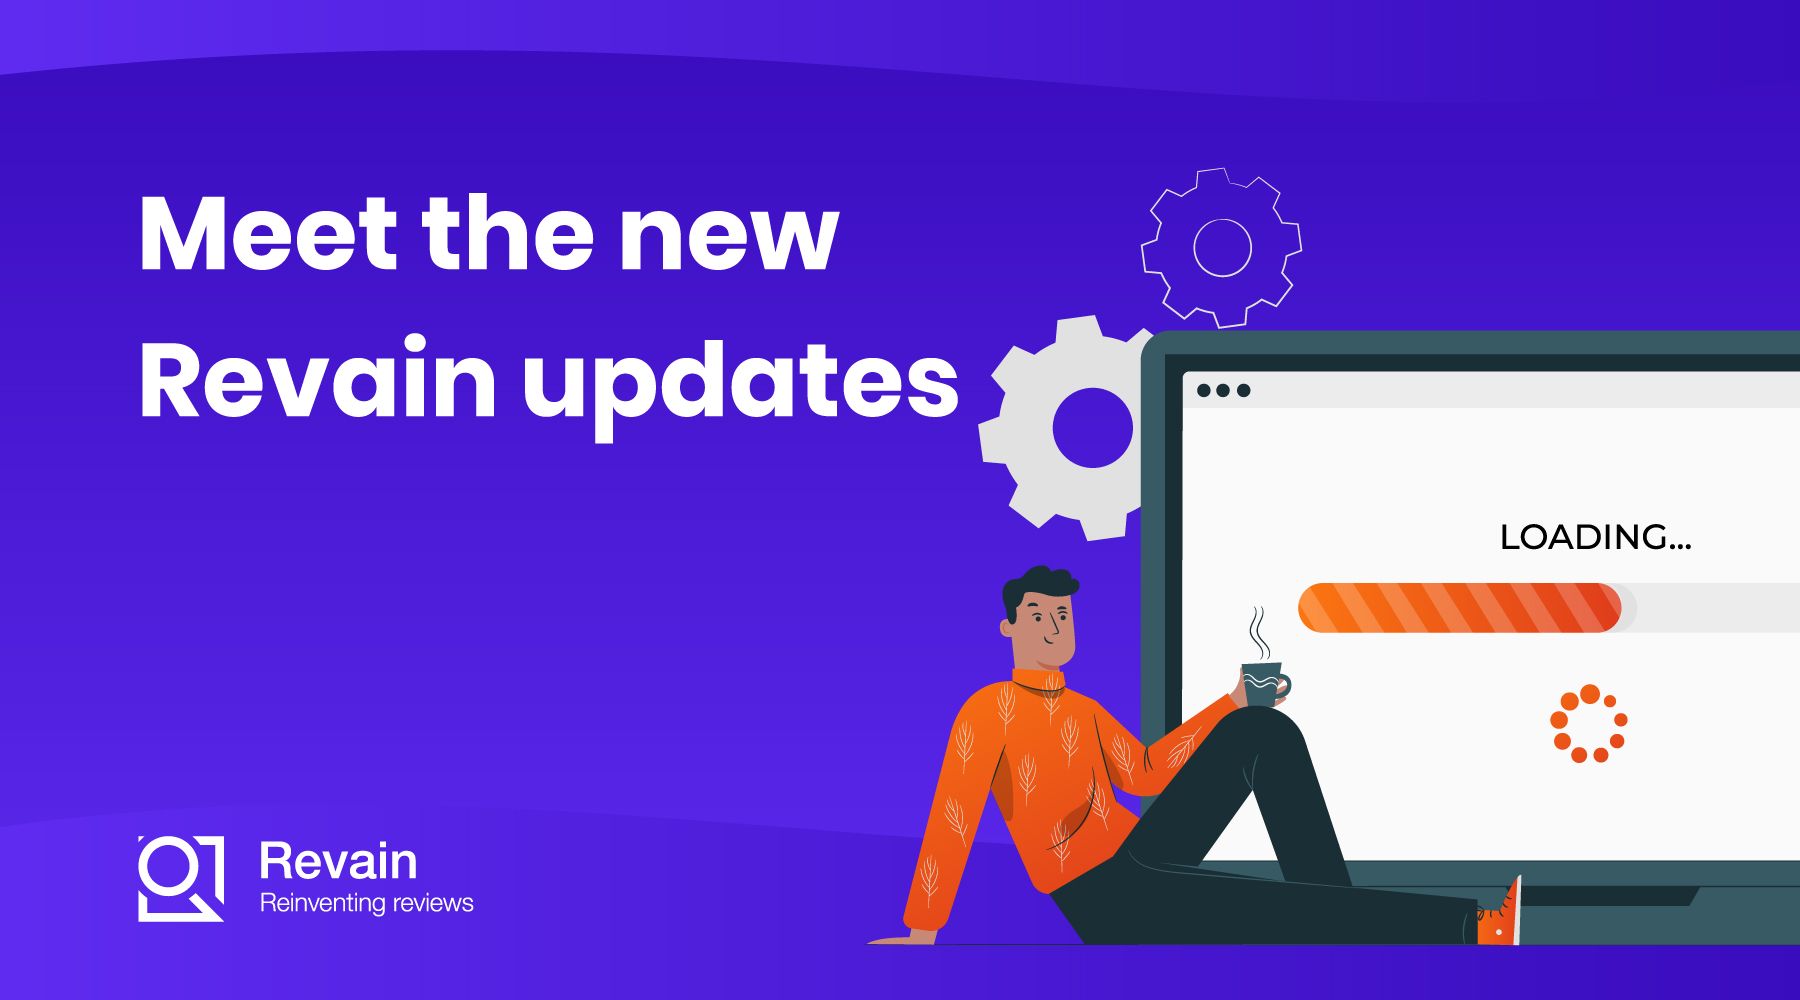 Dear Revainers, welcome the new Revain updates!